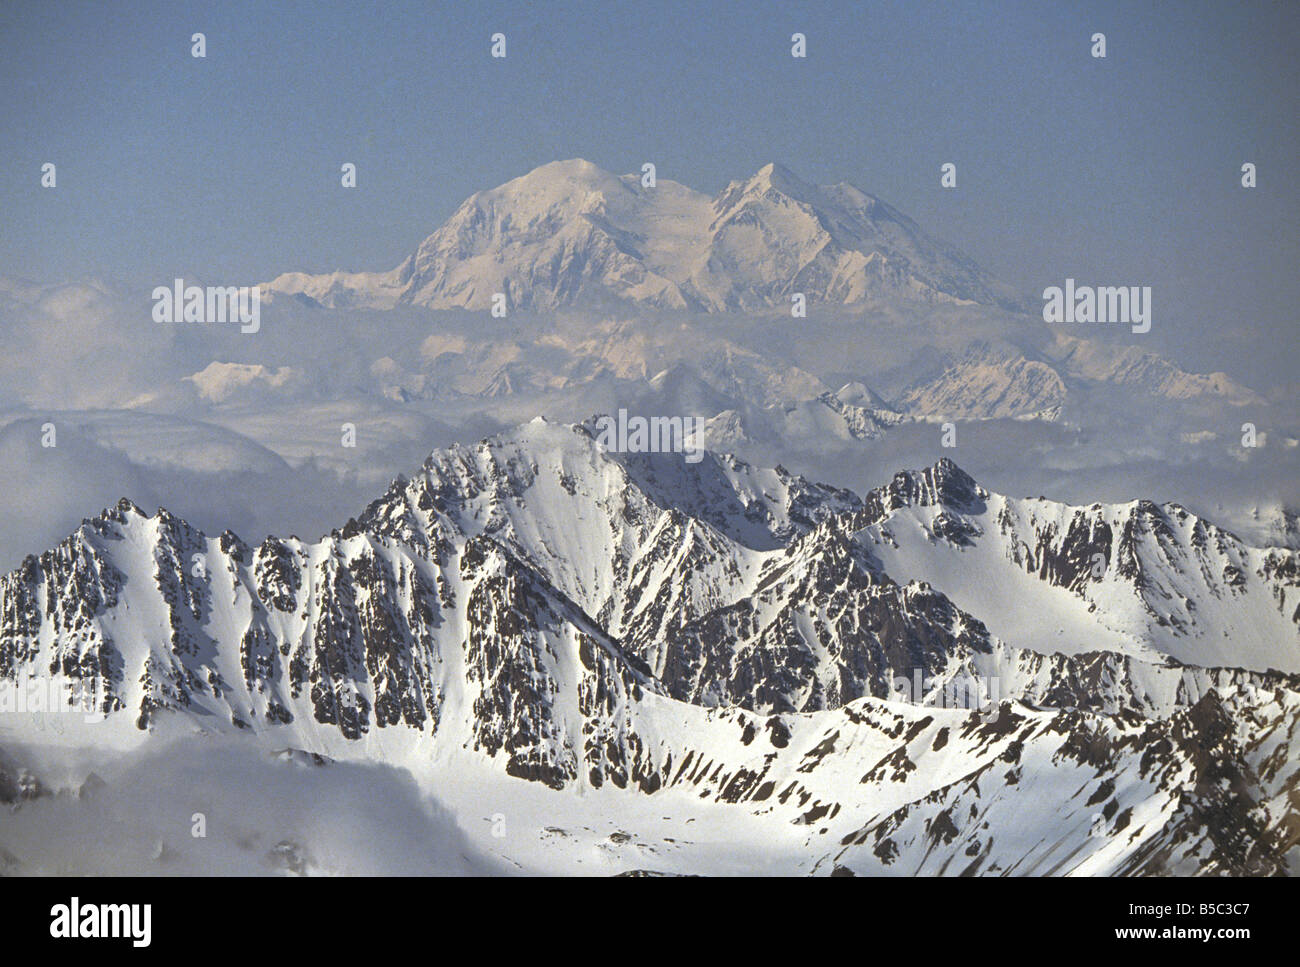 A view of massive Mount McKinley highest peak in the United States in Denali National Park Stock Photo